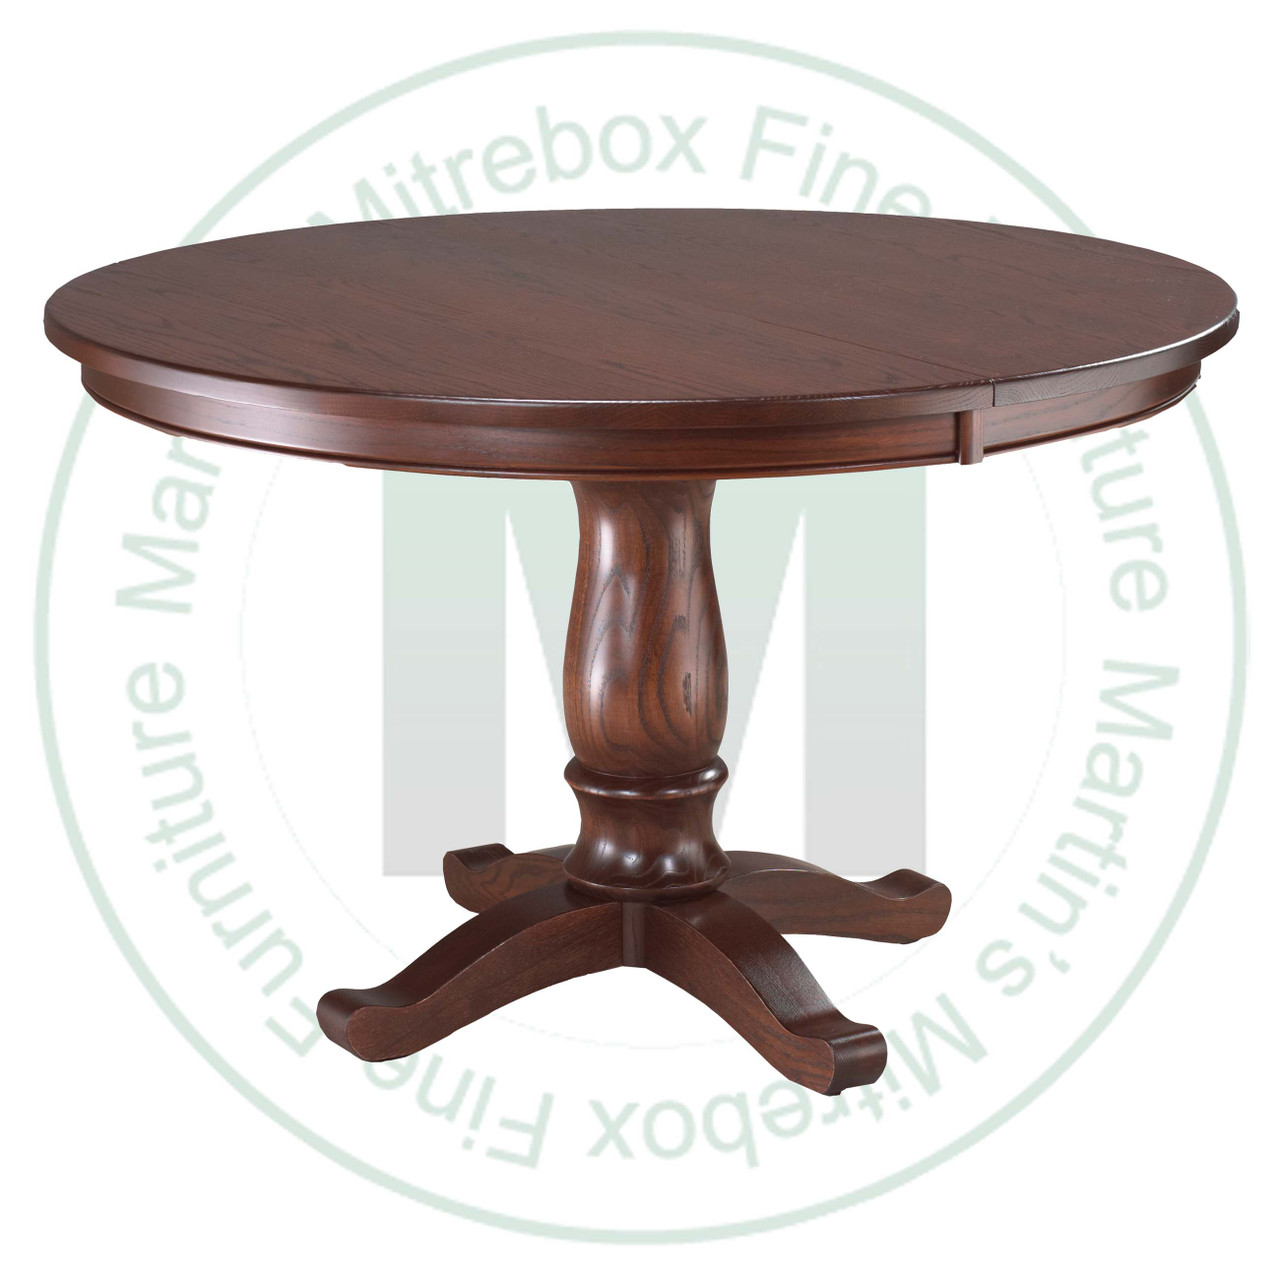 Maple Kimberly Crest Single Pedestal Table 36''D x 48''W x 30''H Round Solid Table. Table Has 1'' Thick Top.